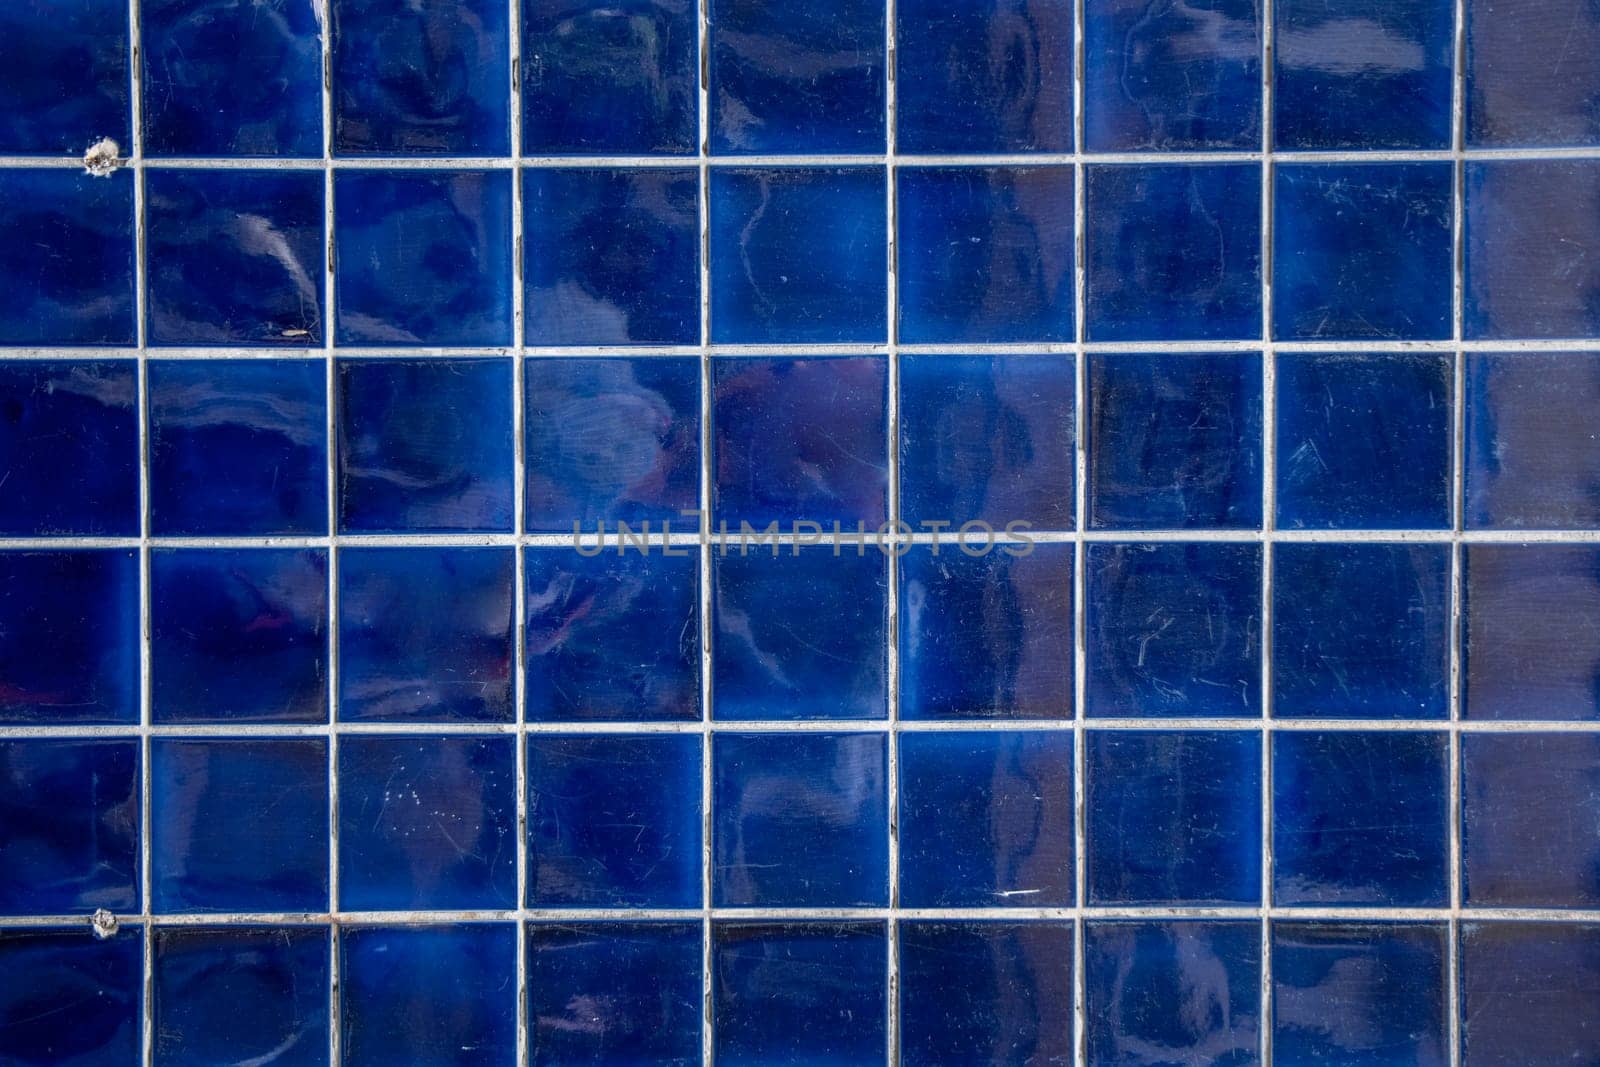 dark blue tile wall, abstract pattern mosaic background, textured wall or floor by KaterinaDalemans